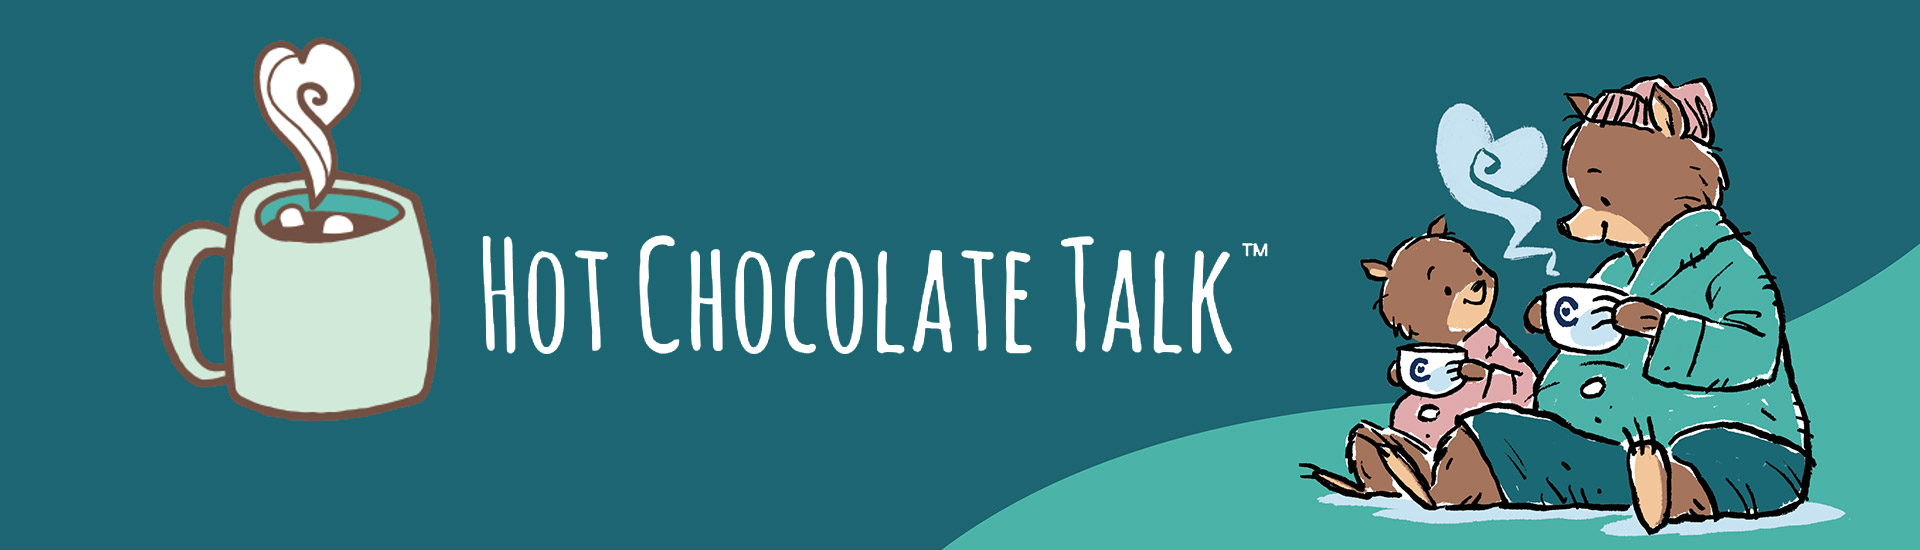 Child Sexual Abuse Prevention: Hot Chocolate Talk® Campaign